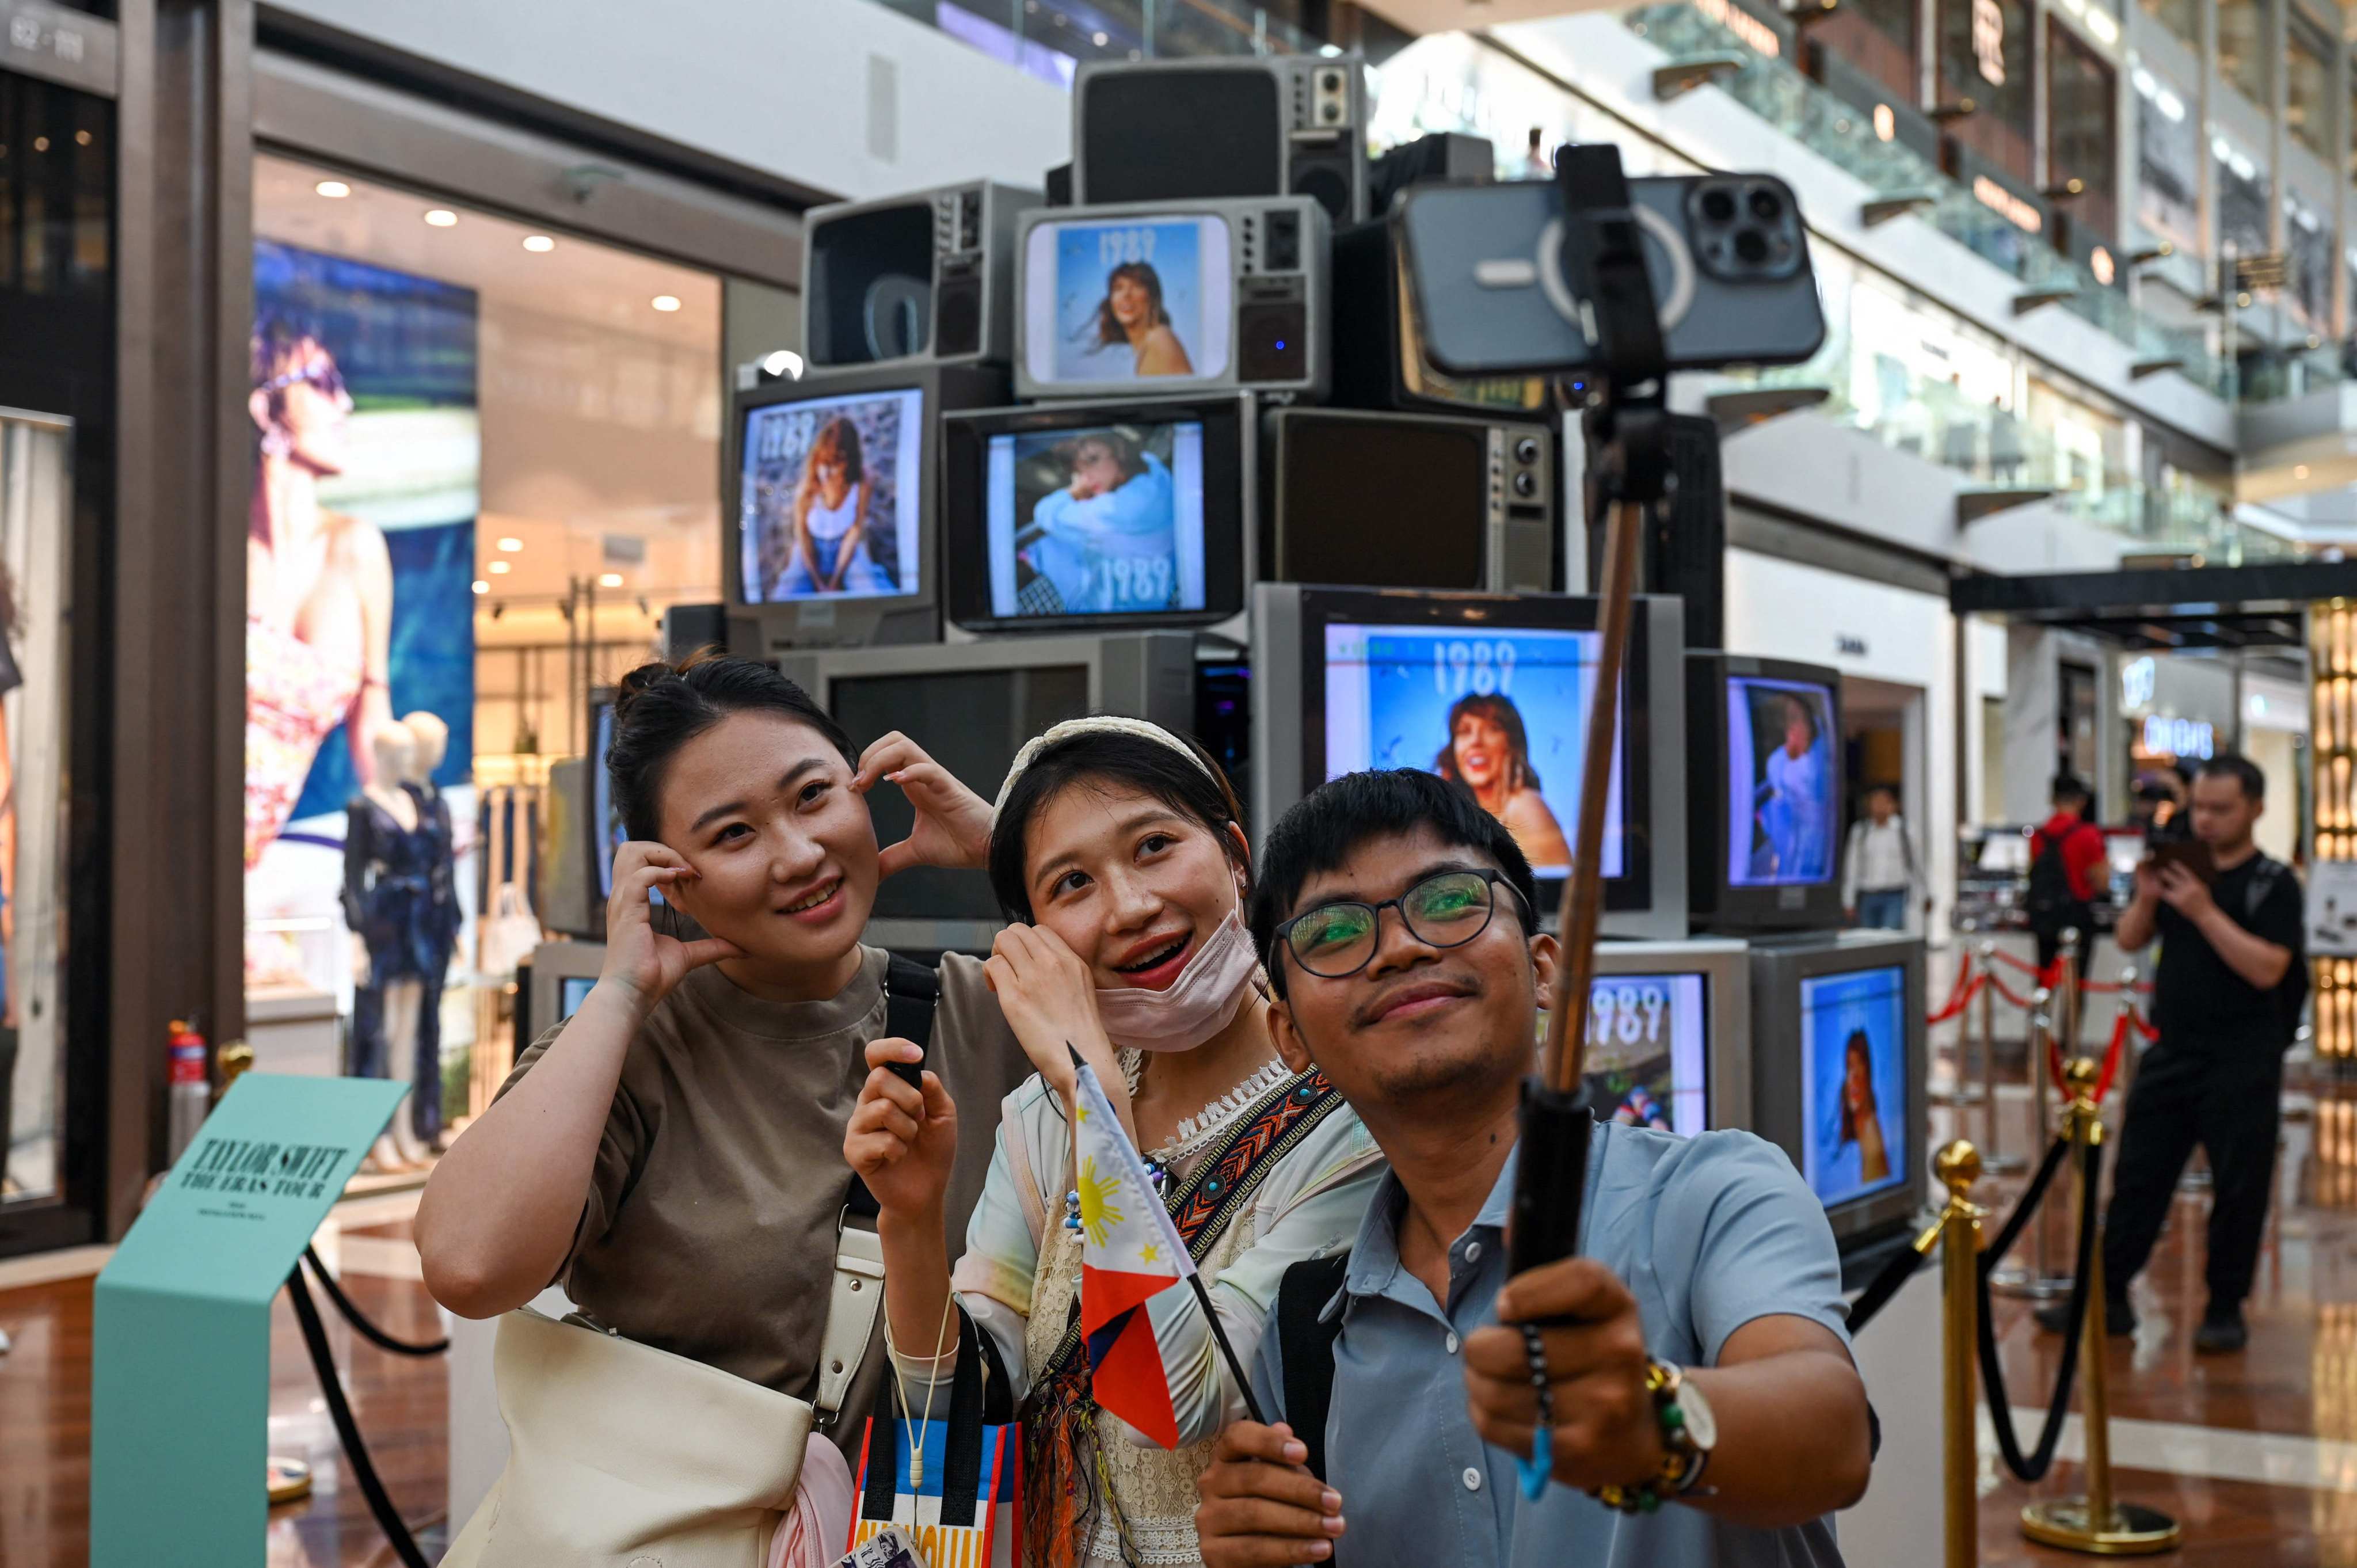 Taylor Swift fans pose for pictures at an “Eras Tour Trail” installation at the Marina Bay Sands complex in Singapore on February 28. More than 300,000 are attending the US superstar’s six sold-out shows at the National Stadium from March 2-9. Photo: AFP